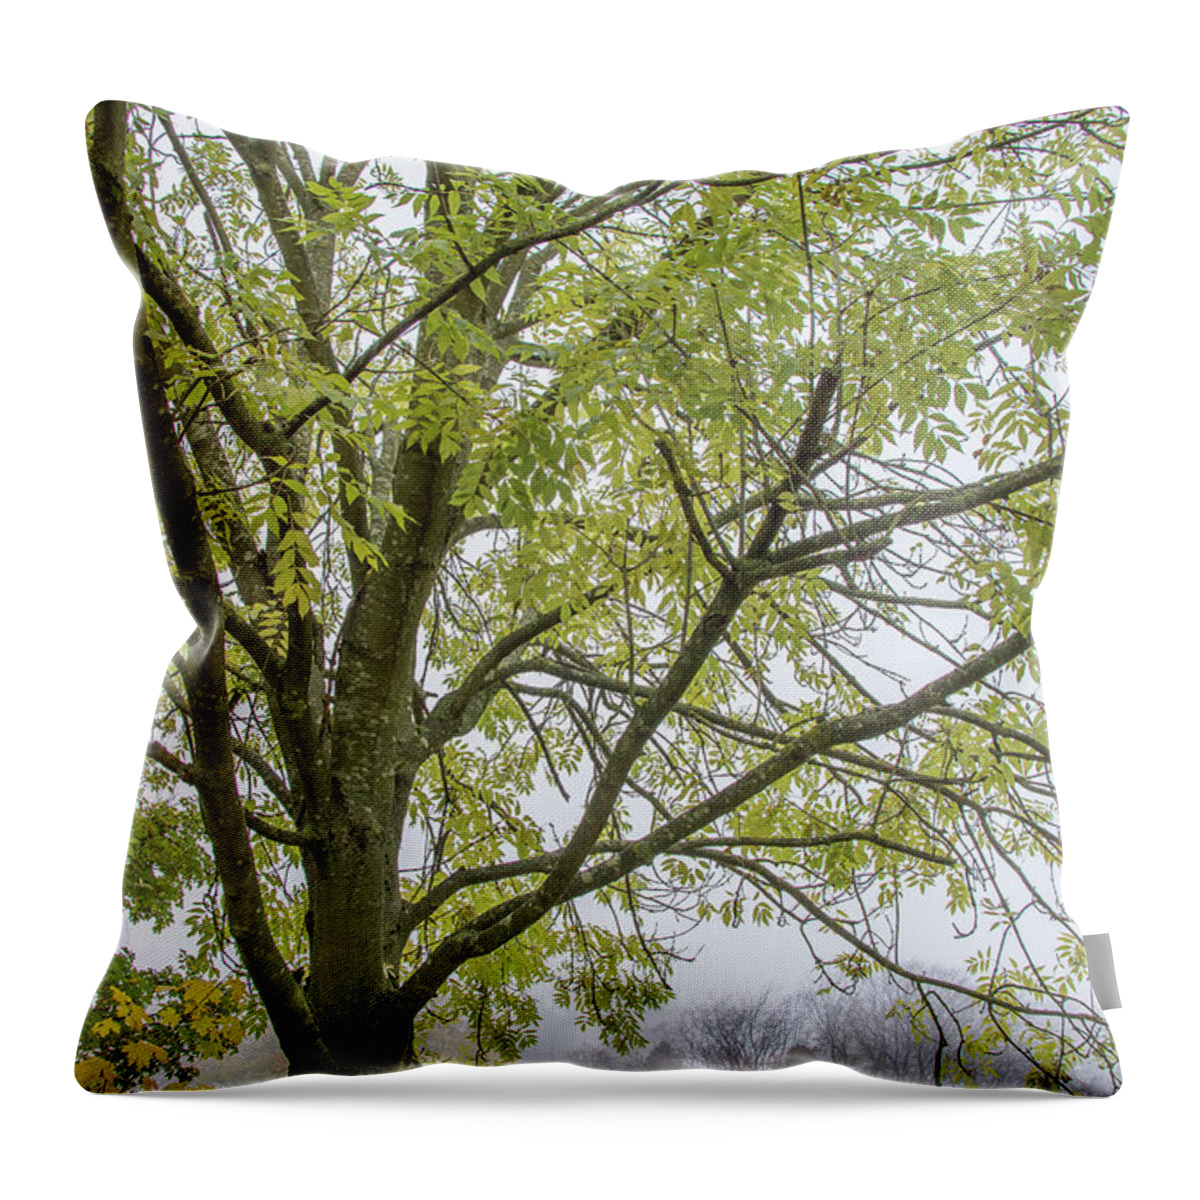 Trent Park Throw Pillow featuring the photograph Trent Park Trees Fall 3 by Edmund Peston